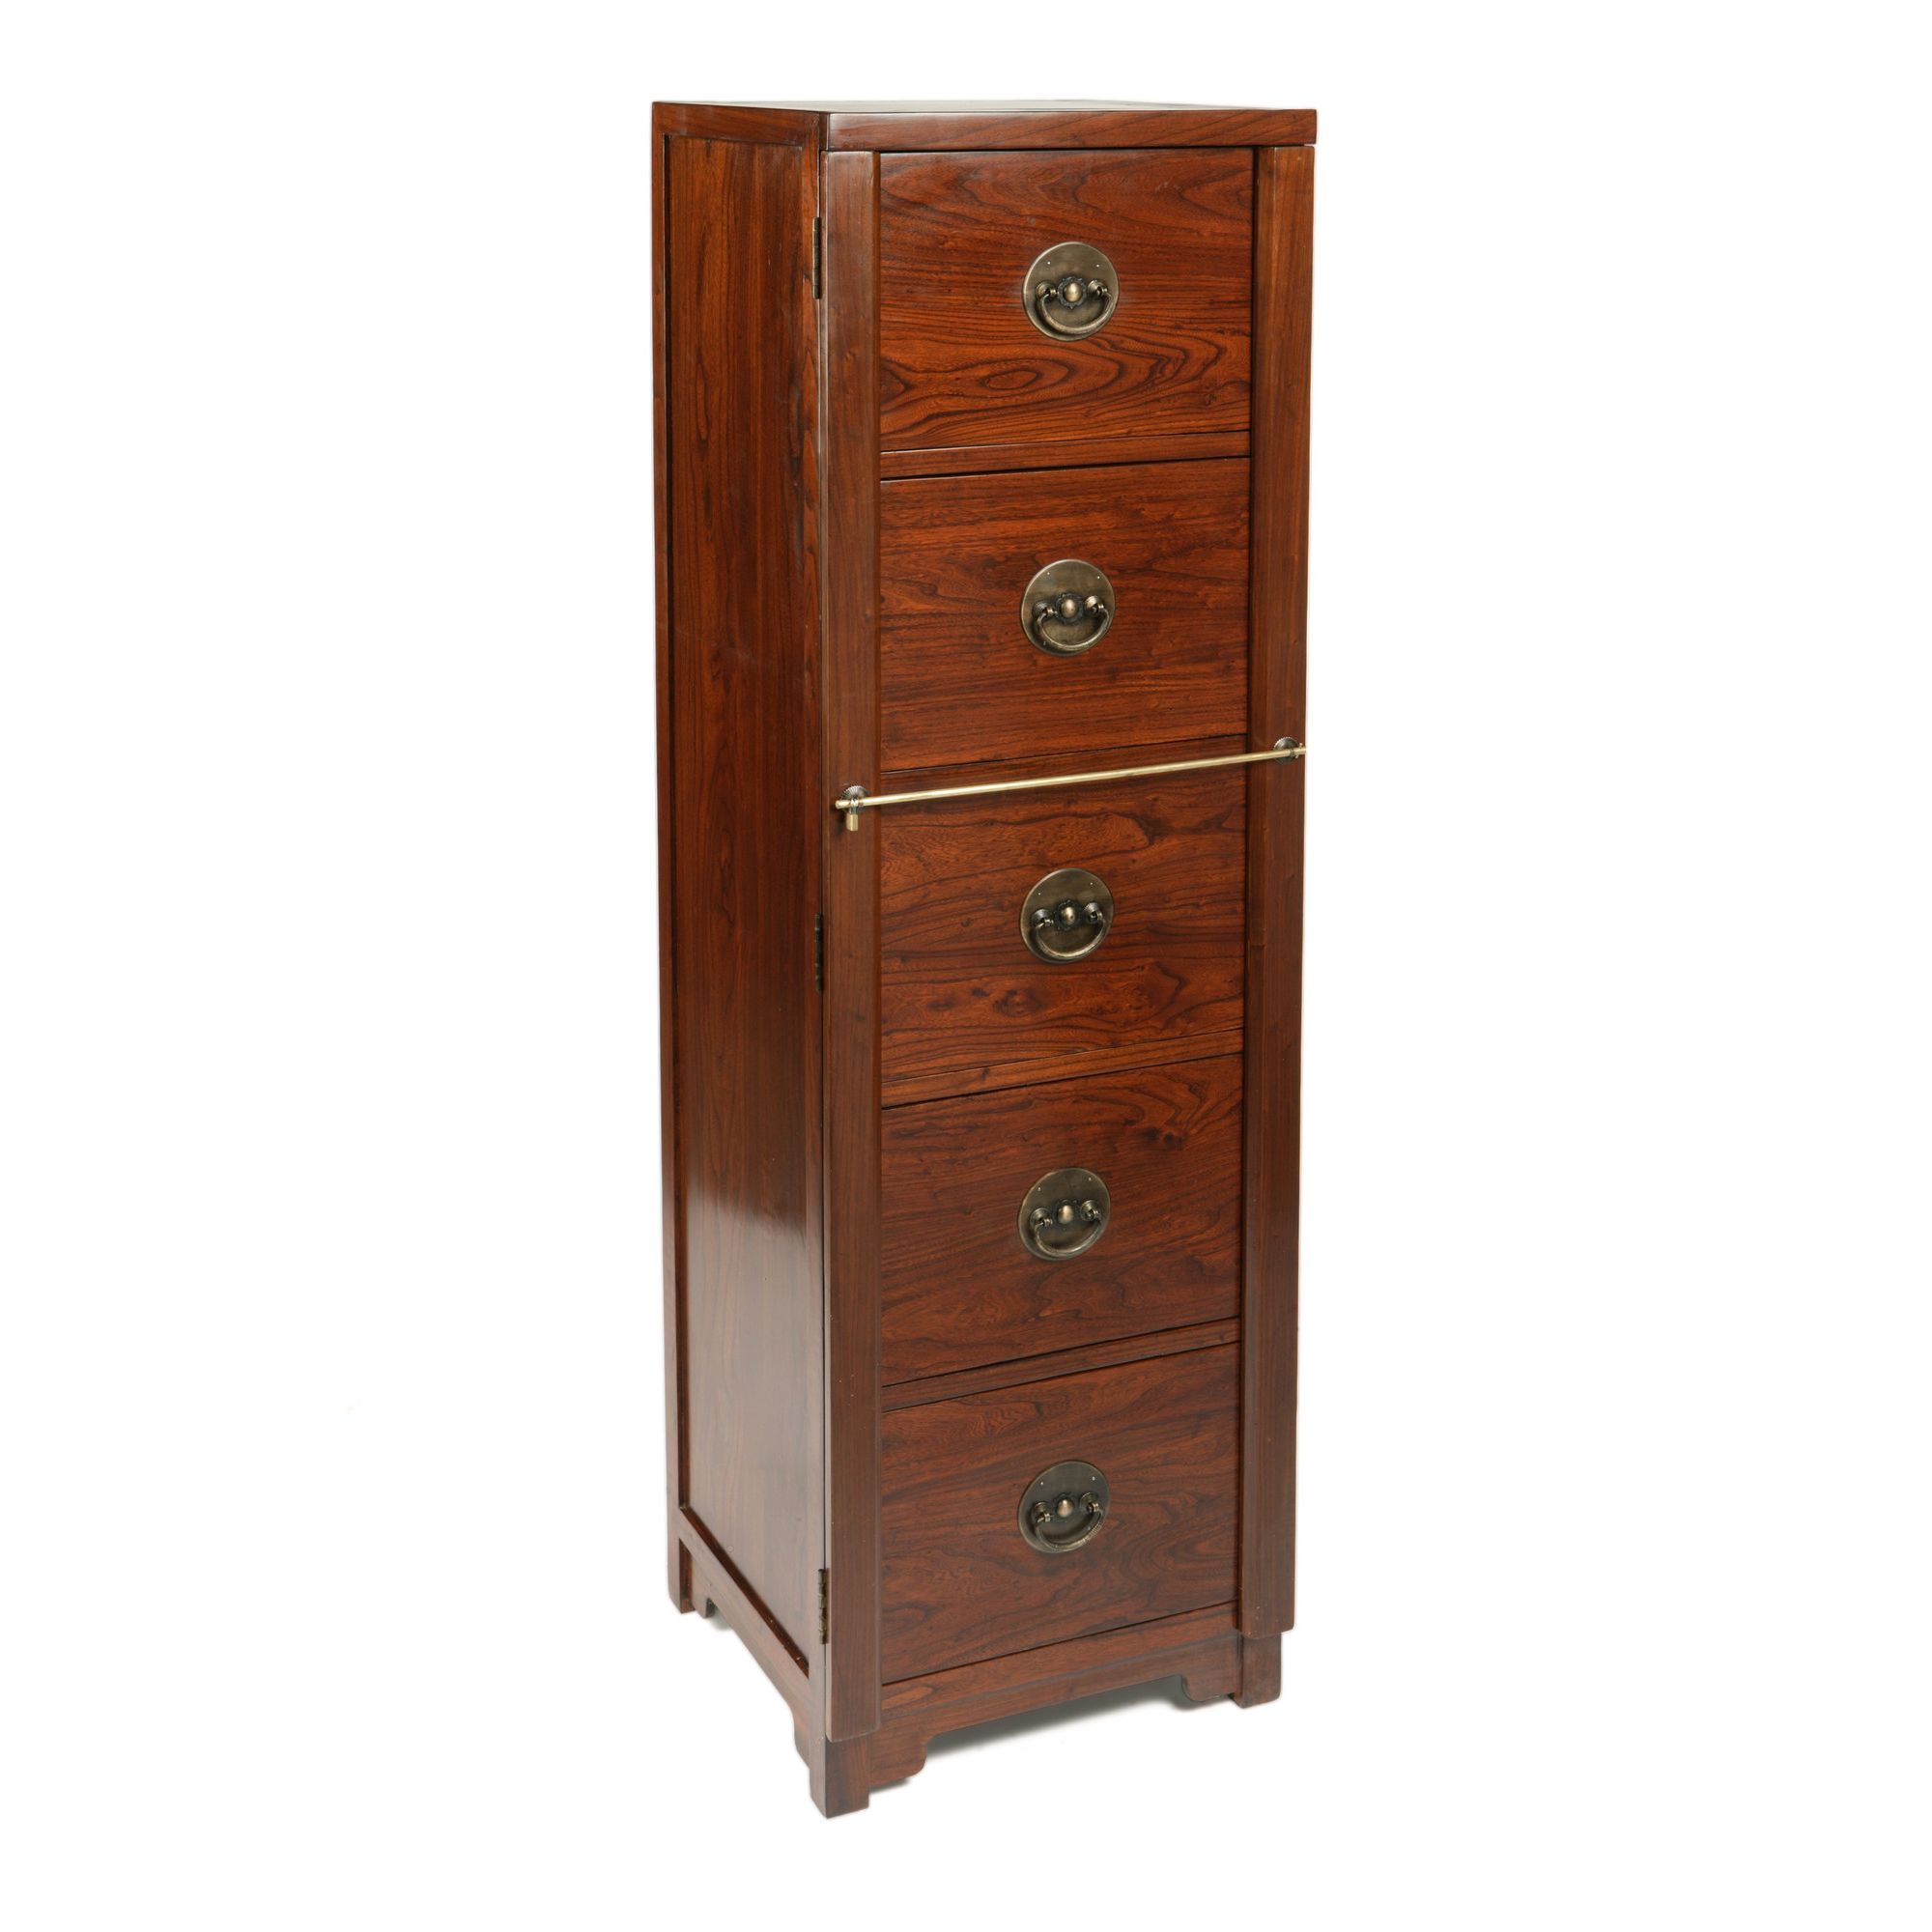 Shimu Chinese Classical Filing Cabinet - Warm Elm at Tesco Direct